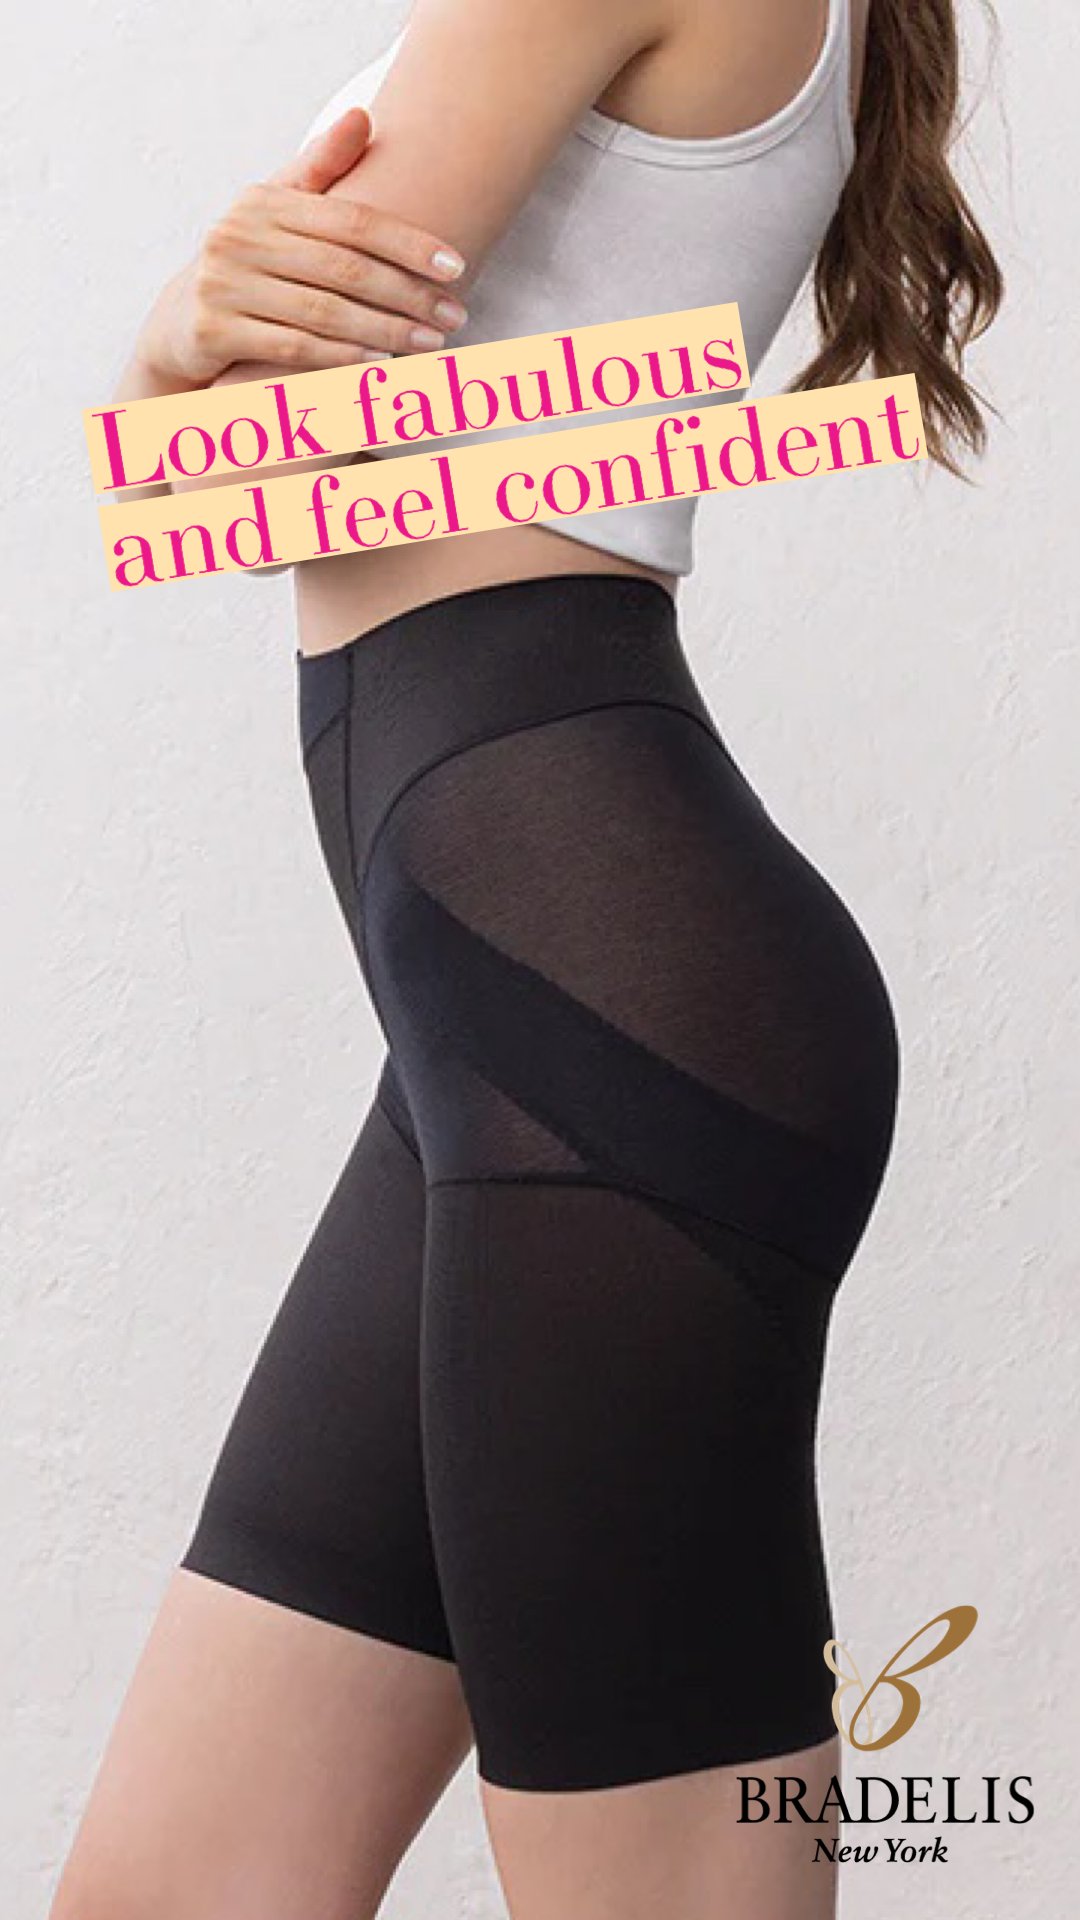 Bradelis New York on X: Say goodbye to wardrobe worries and hello to  flawless curves! Our shaping girdle is your secret weapon for that stunning  summer dress👗 Find the one at our